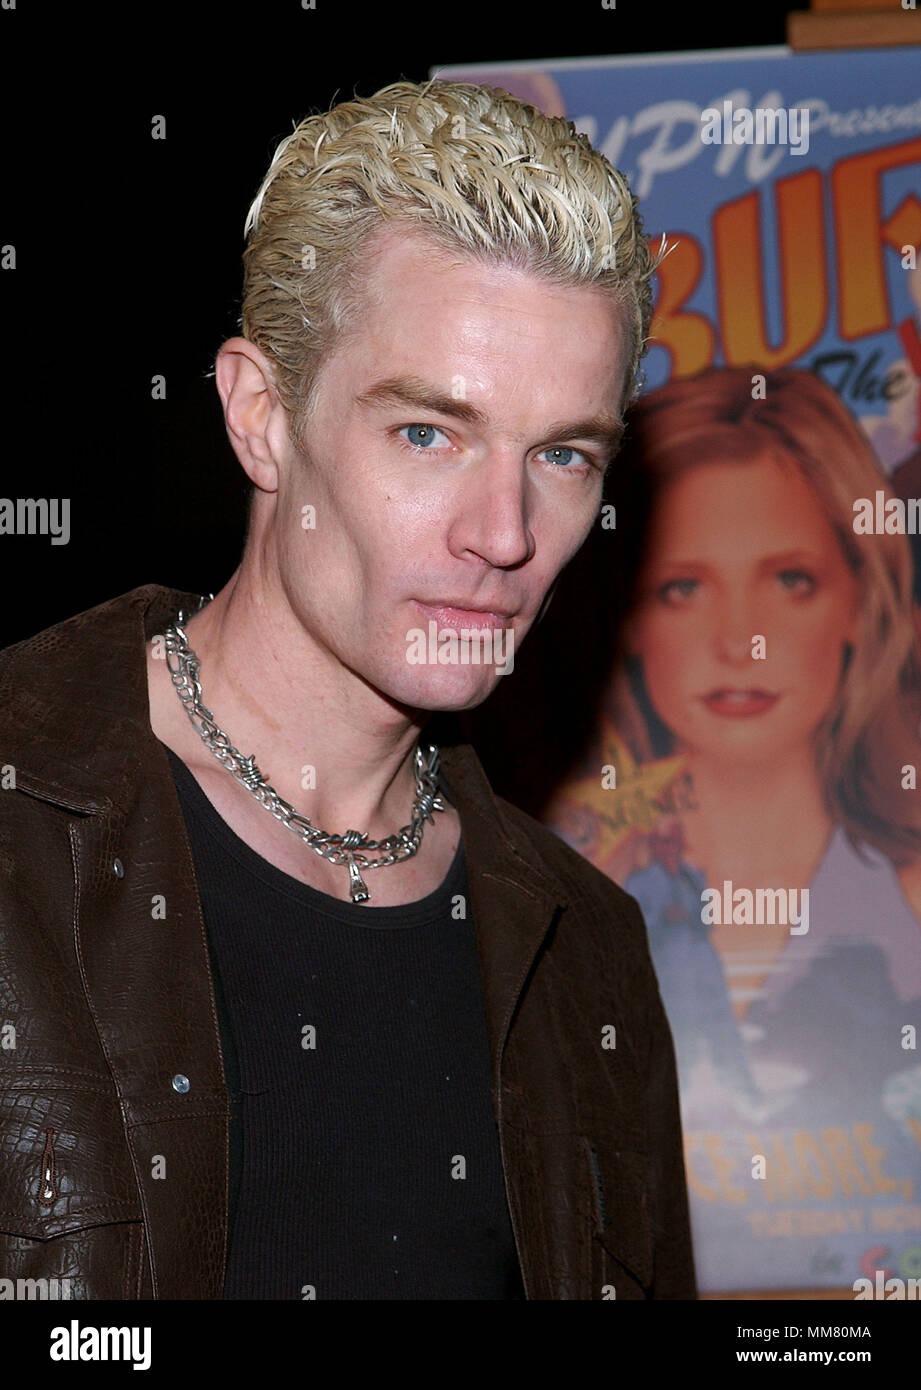 James Marsters posing  at the screening of Buffy The Vampire Slayer, Musical Episode at the Paramount Theatre on the Paramount lot in Los angeles. November 2, 2001.  MarstersJames03.jpgMarstersJames03 Red Carpet Event, Vertical, USA, Film Industry, Celebrities,  Photography, Bestof, Arts Culture and Entertainment, Topix Celebrities fashion /  Vertical, Best of, Event in Hollywood Life - California,  Red Carpet and backstage, USA, Film Industry, Celebrities,  movie celebrities, TV celebrities, Music celebrities, Photography, Bestof, Arts Culture and Entertainment,  Topix, headshot, vertical, on Stock Photo